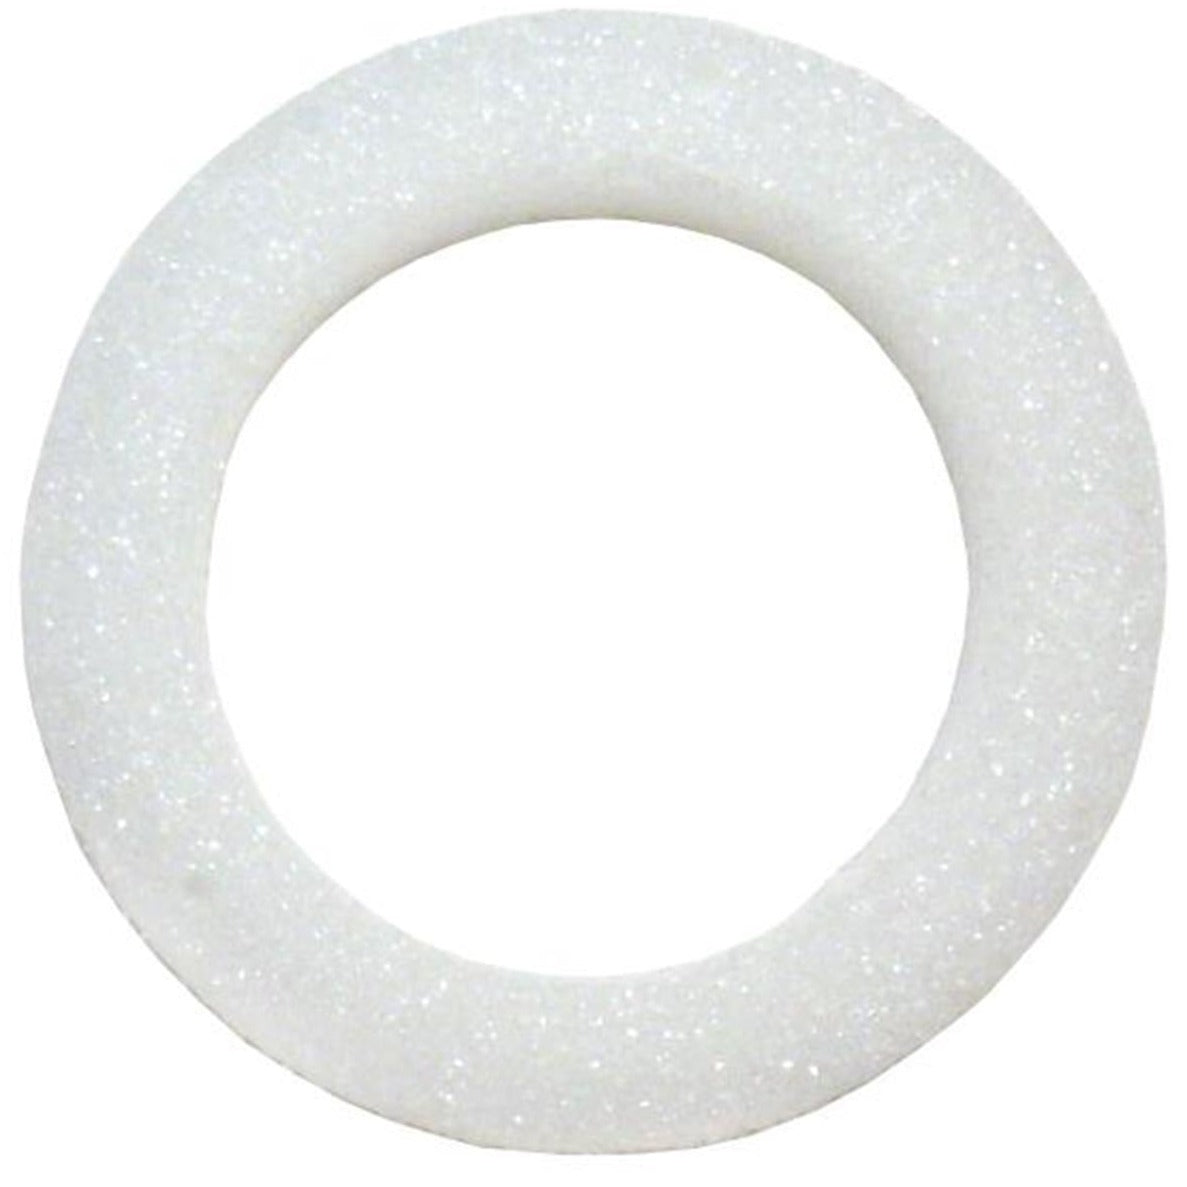 Small Curved Styro Wreath Form - 2 Pack